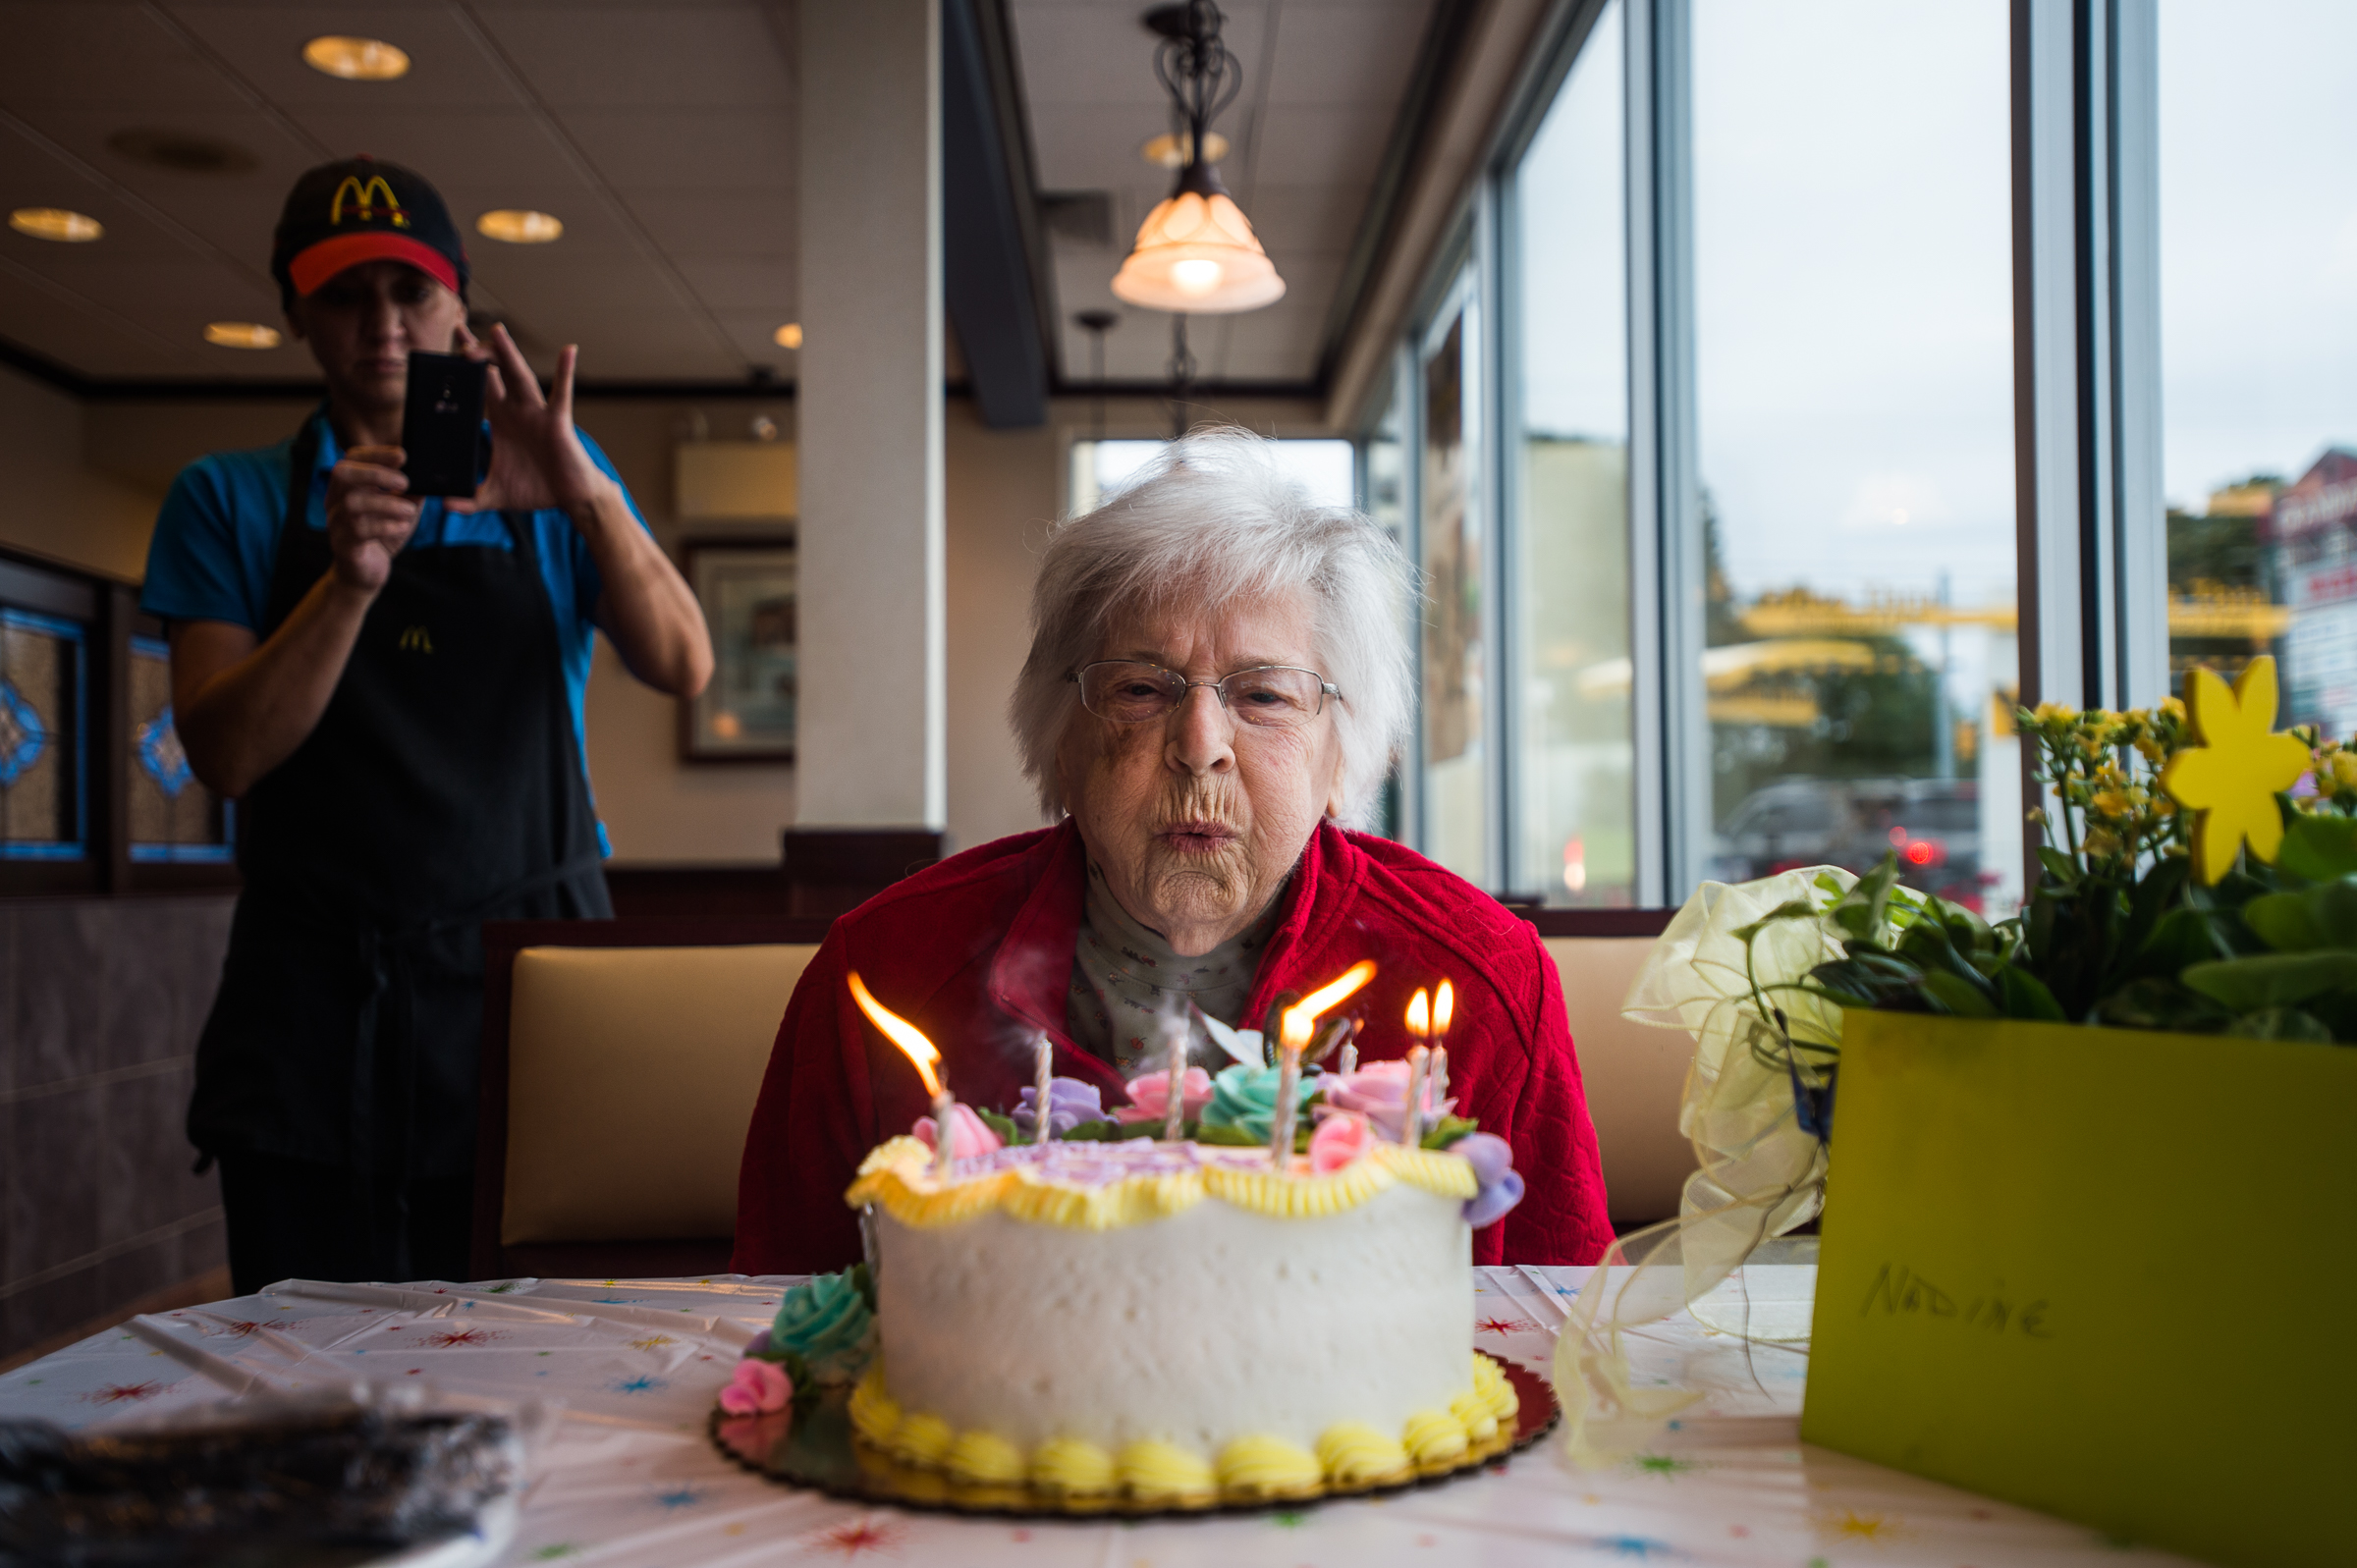 PHOTO: Nadine Baum blows out the candles on her birthday cake, Oct. 13, 2016, at the south Hanover McDonald's during a 100th birthday celebration for the Hanover centenarian.